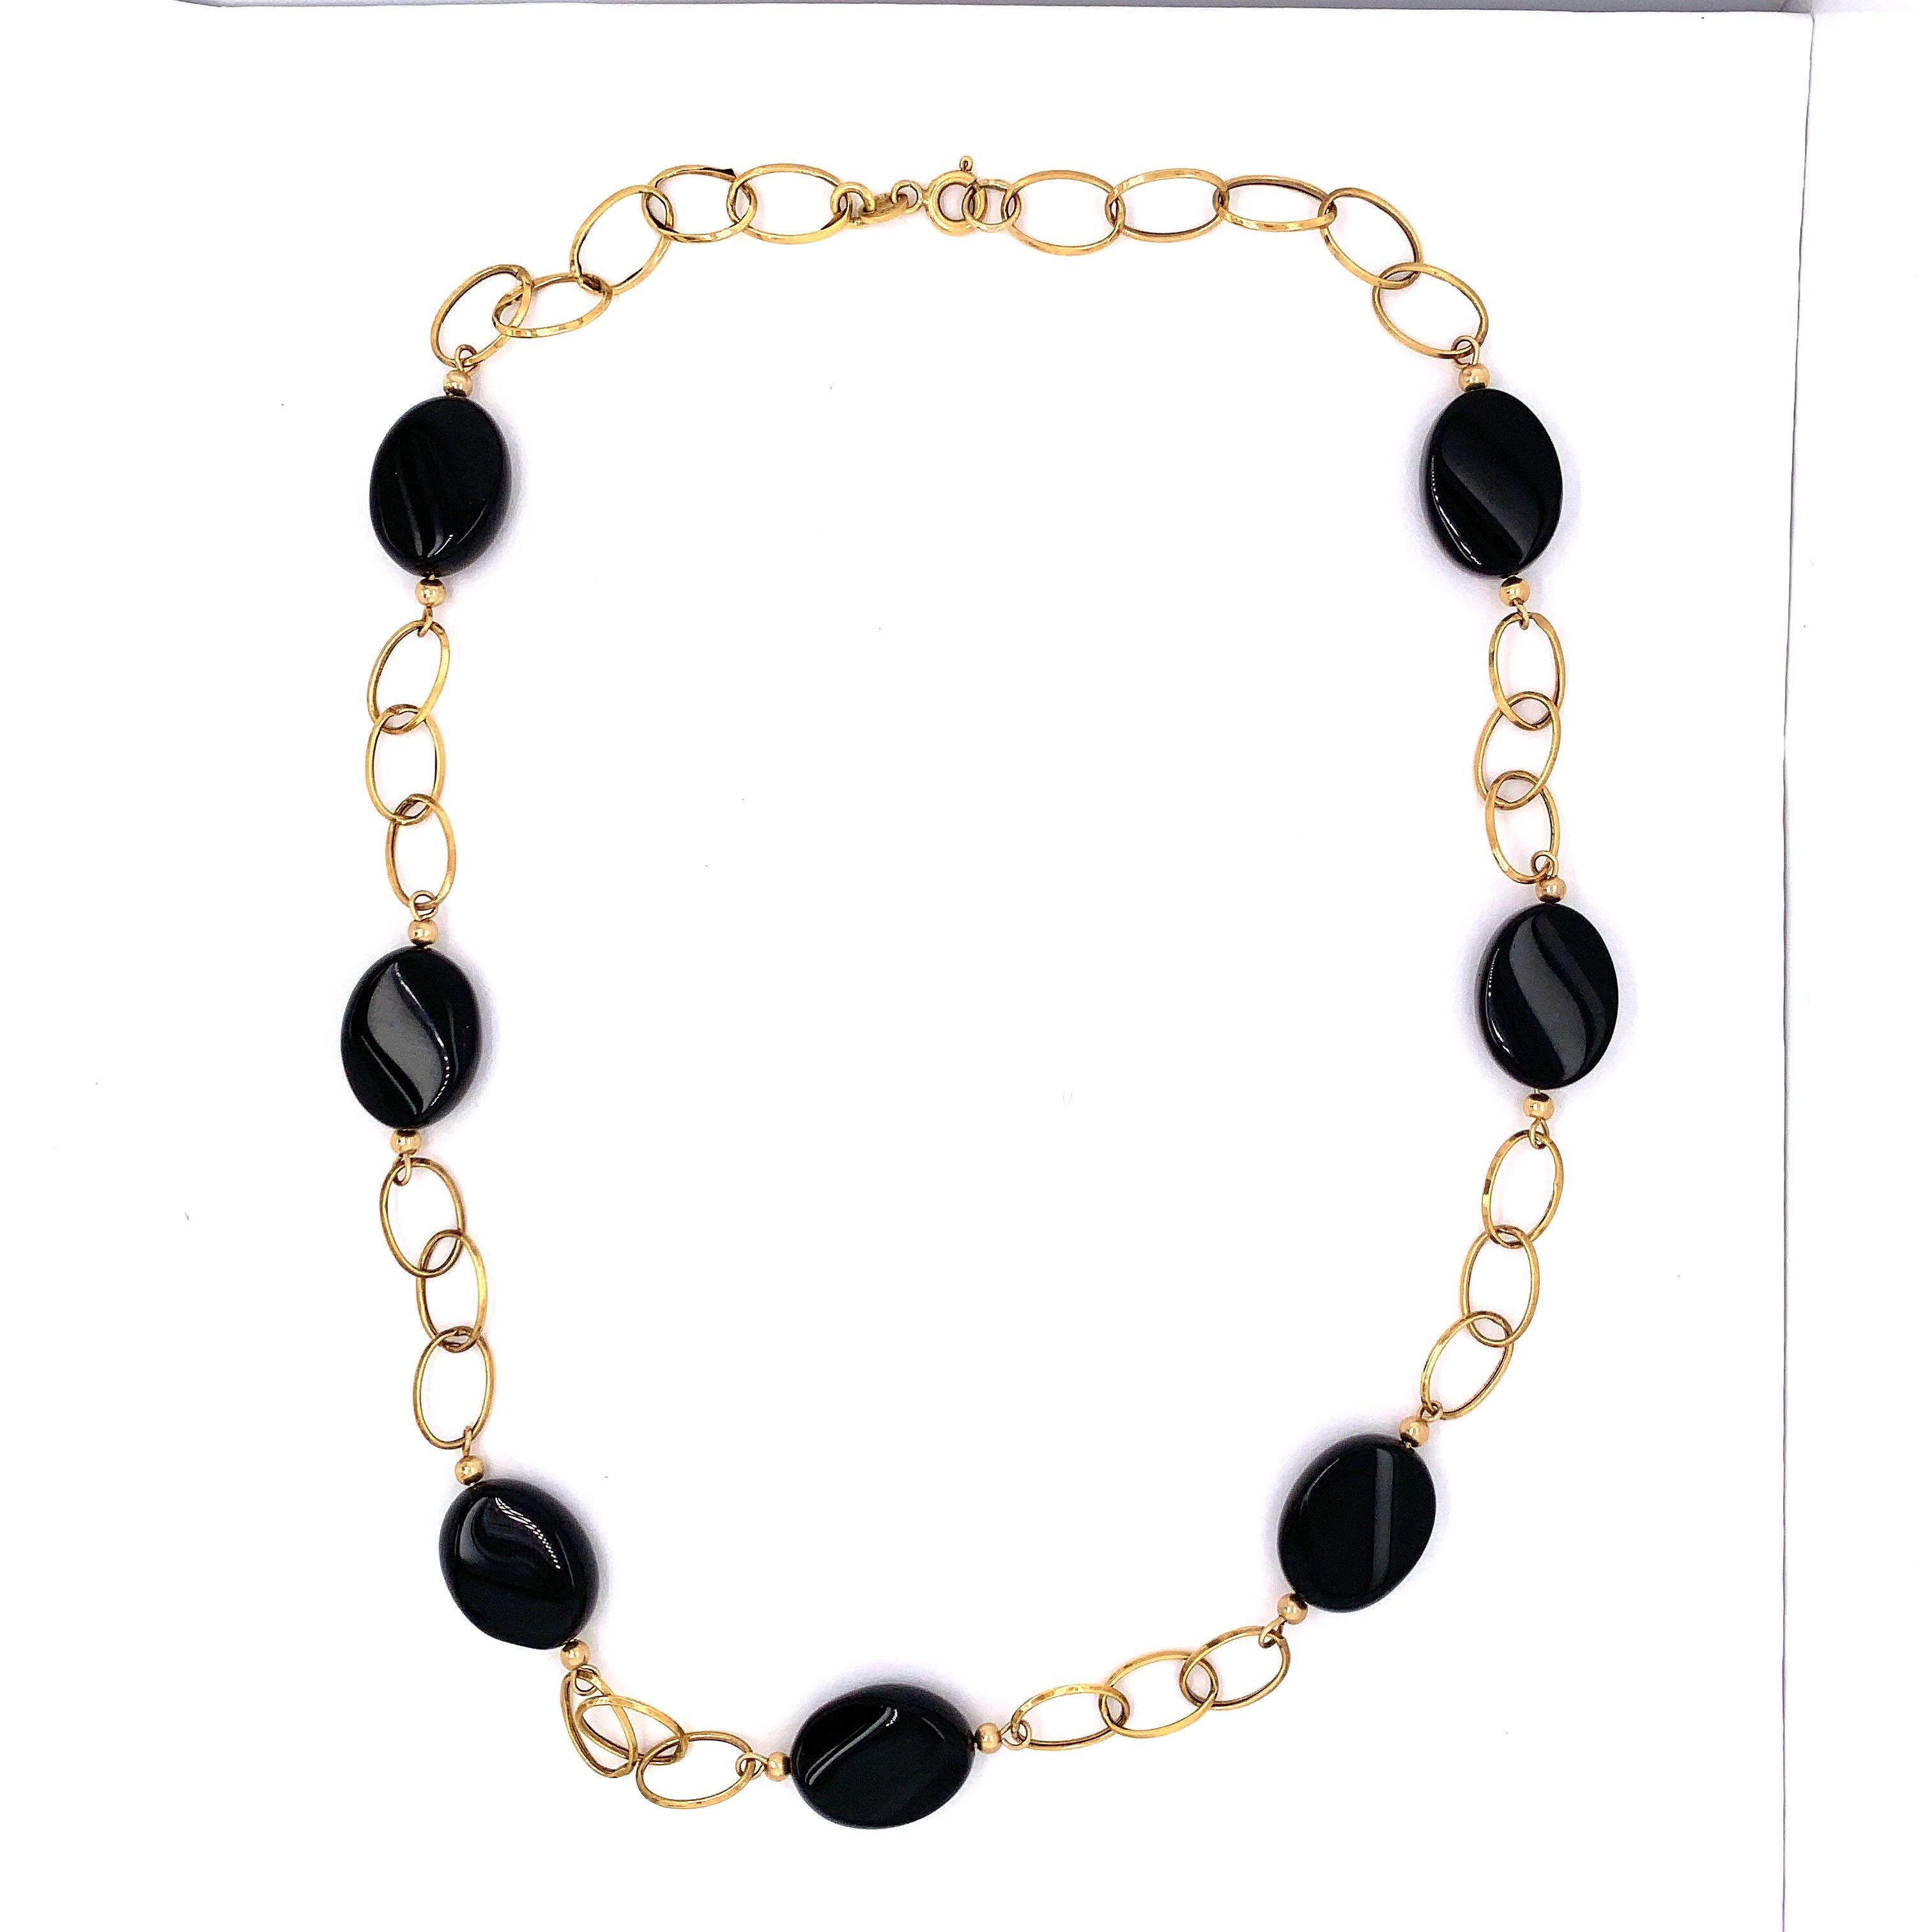 14 Karat Yellow Gold Link Necklace with Ebony Stones 21.2 Grams Total For Sale 1